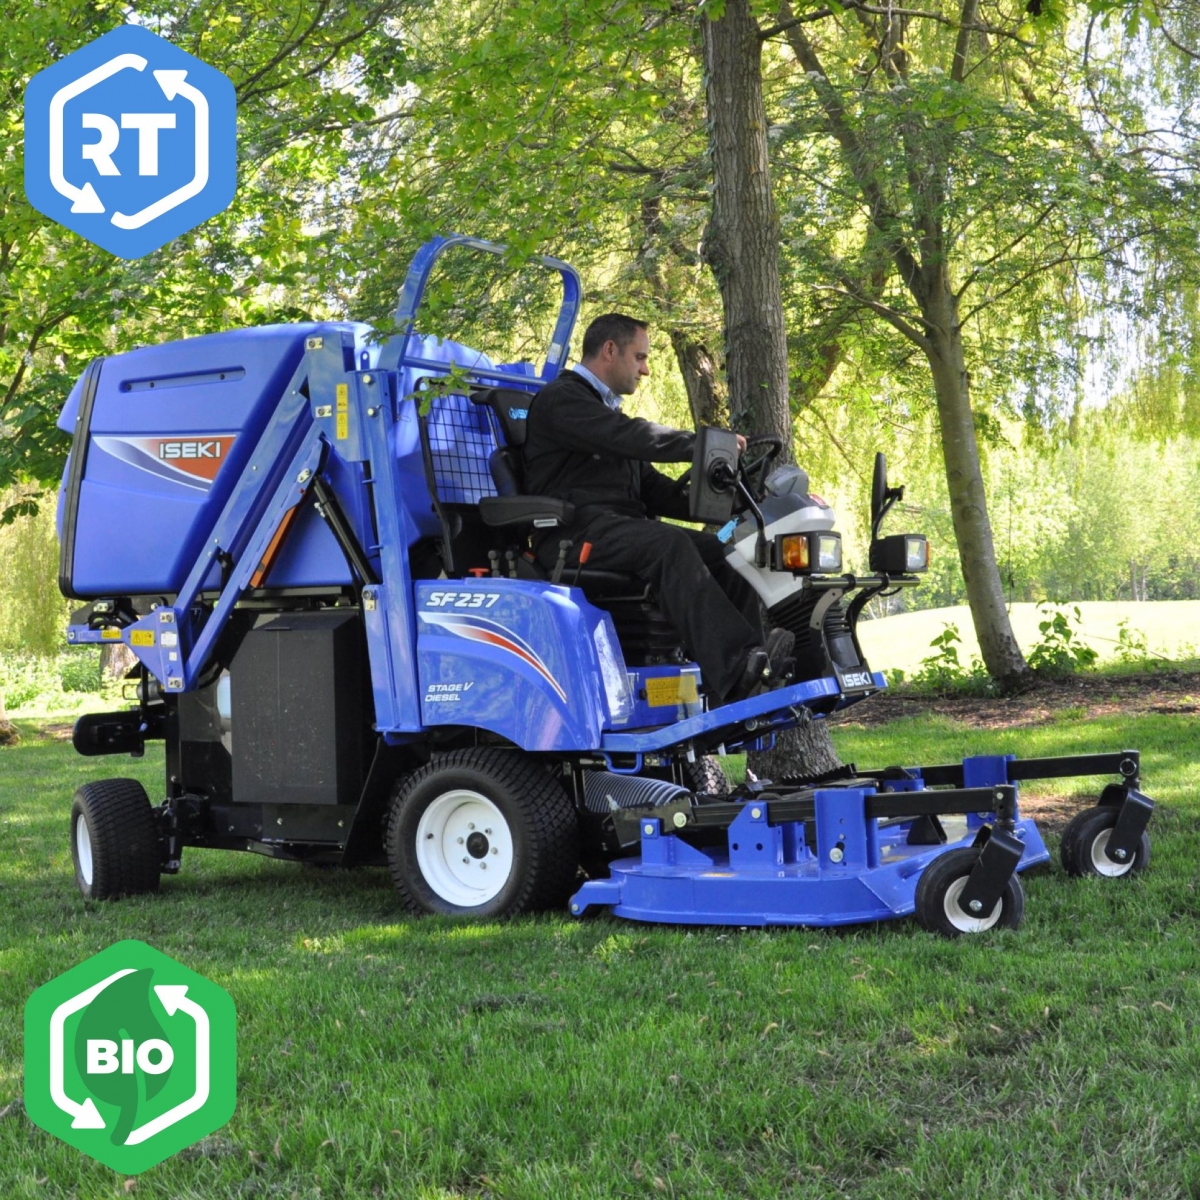 Iseki SF237 Out-front Ride-on Mower